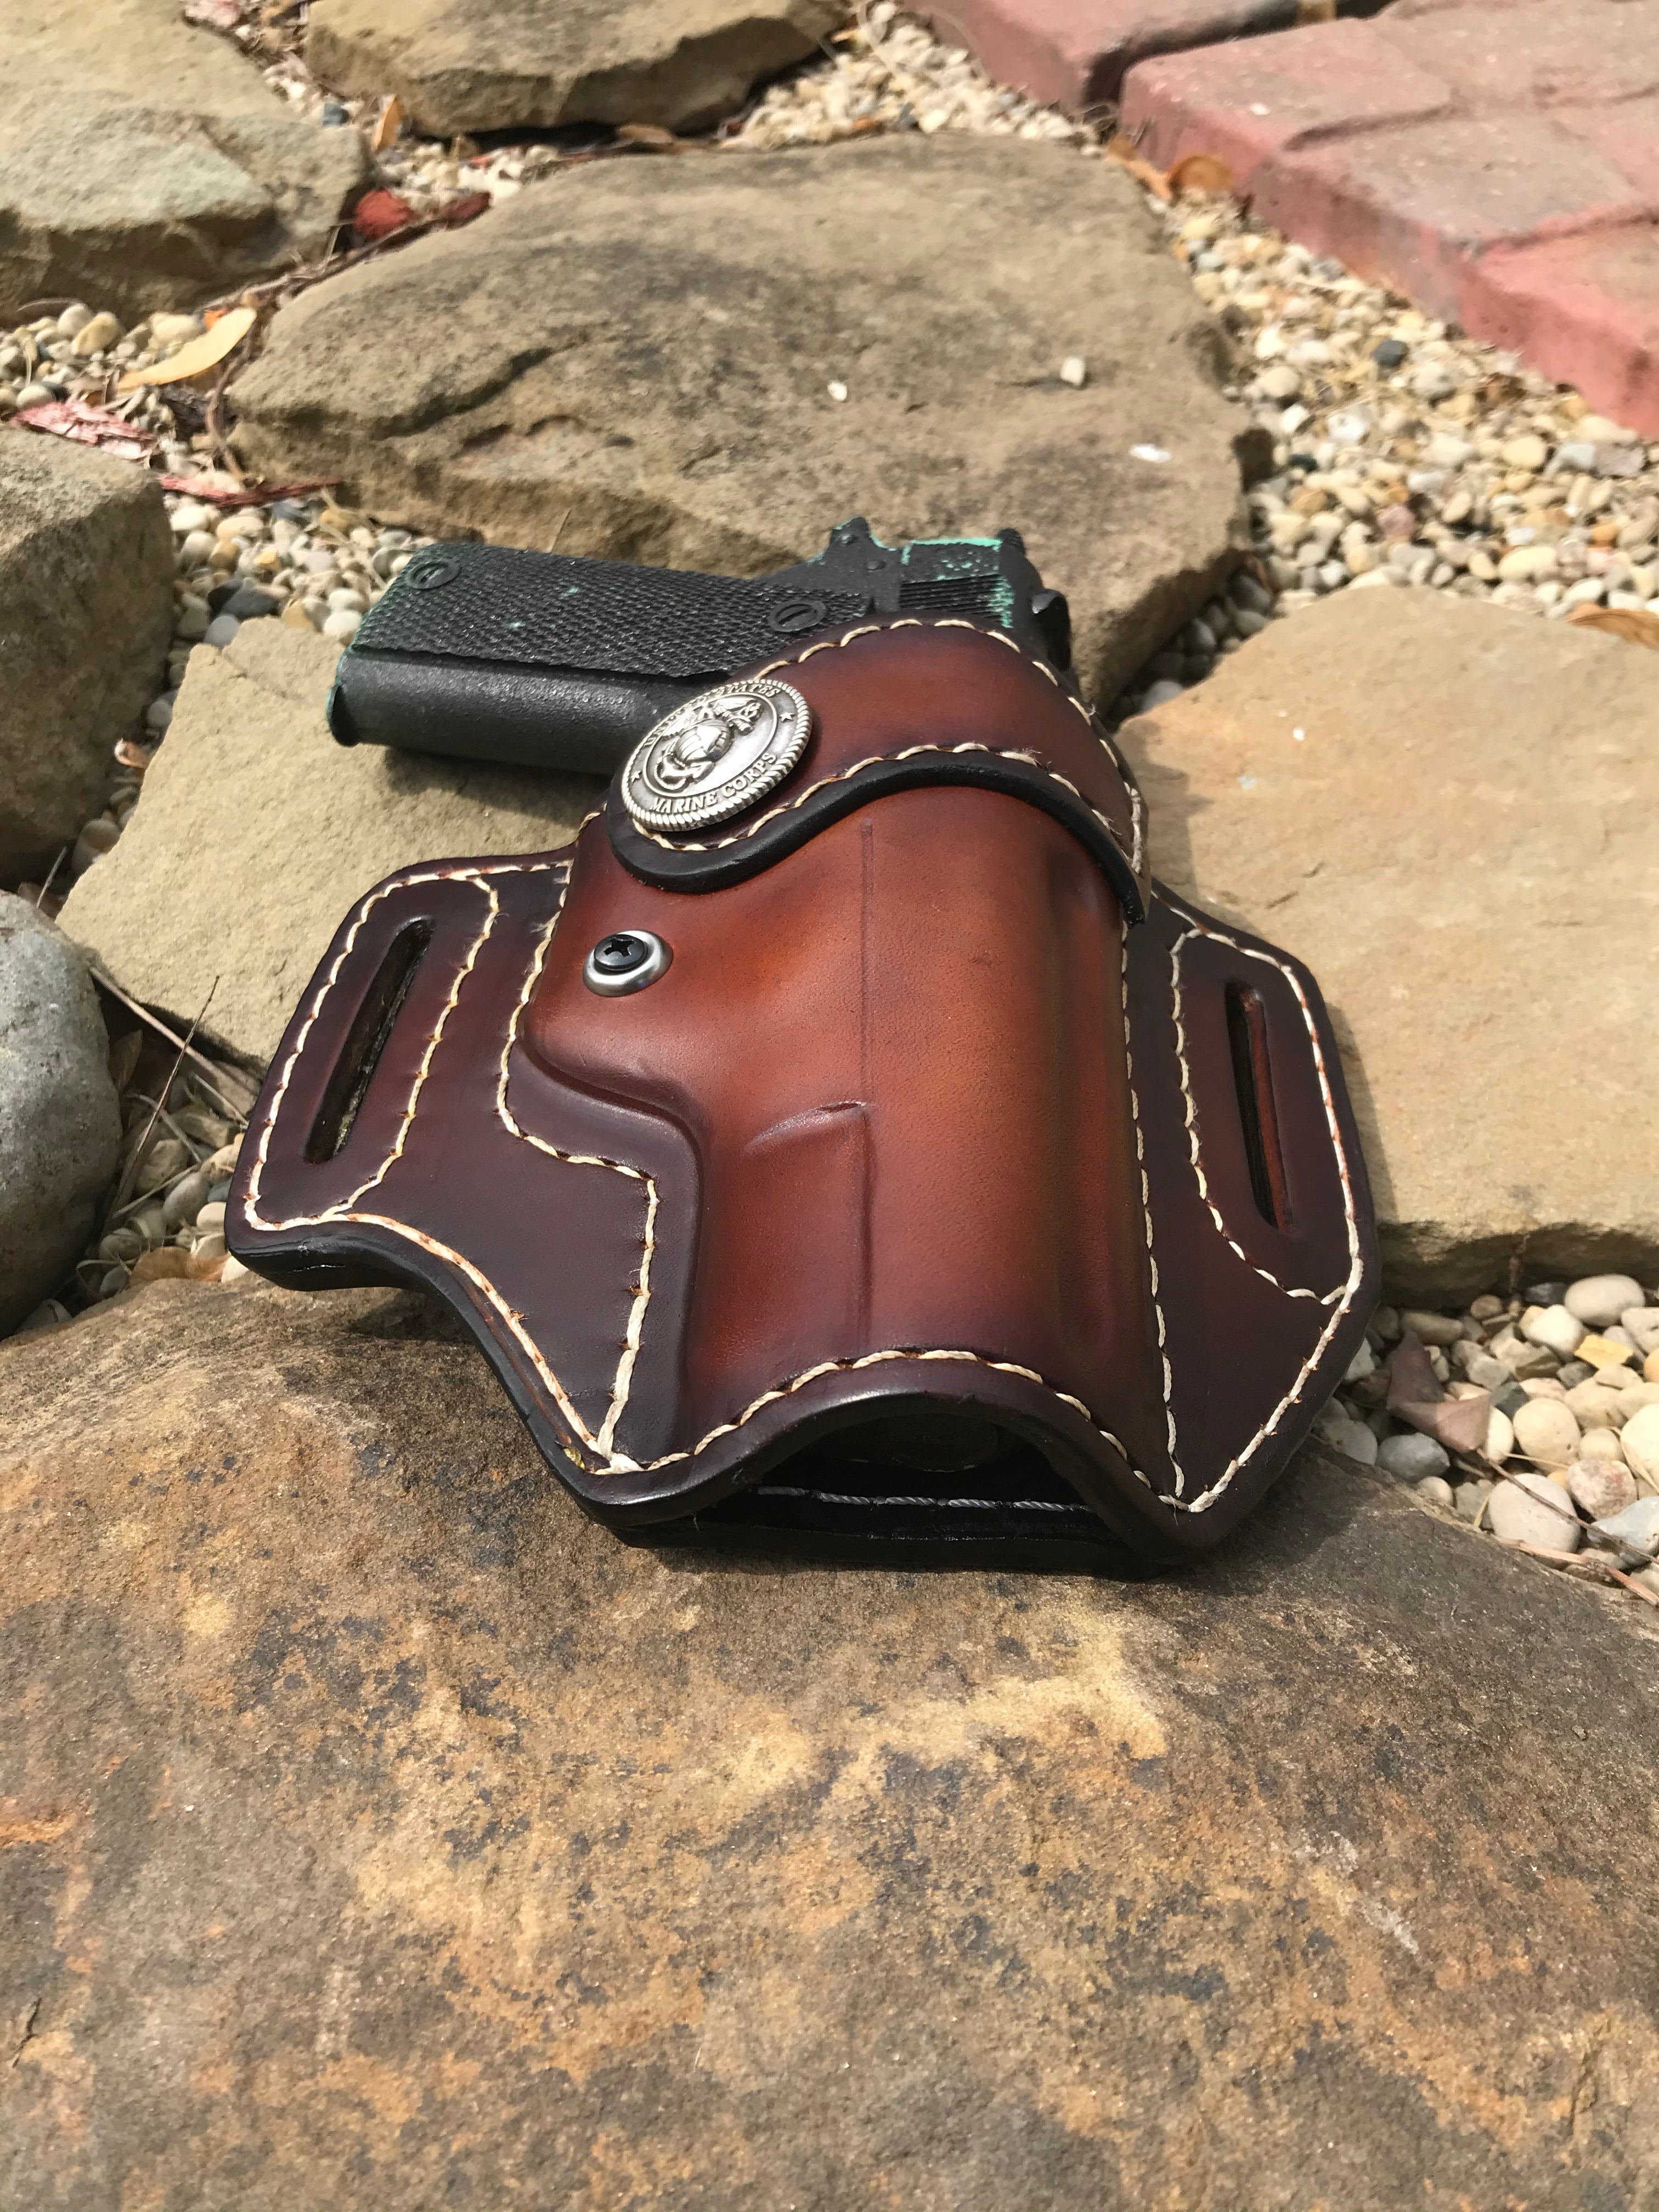 MARINES Emblem Style Locking Leather Holster OWB -BROWN - Black Swamp Leather Company